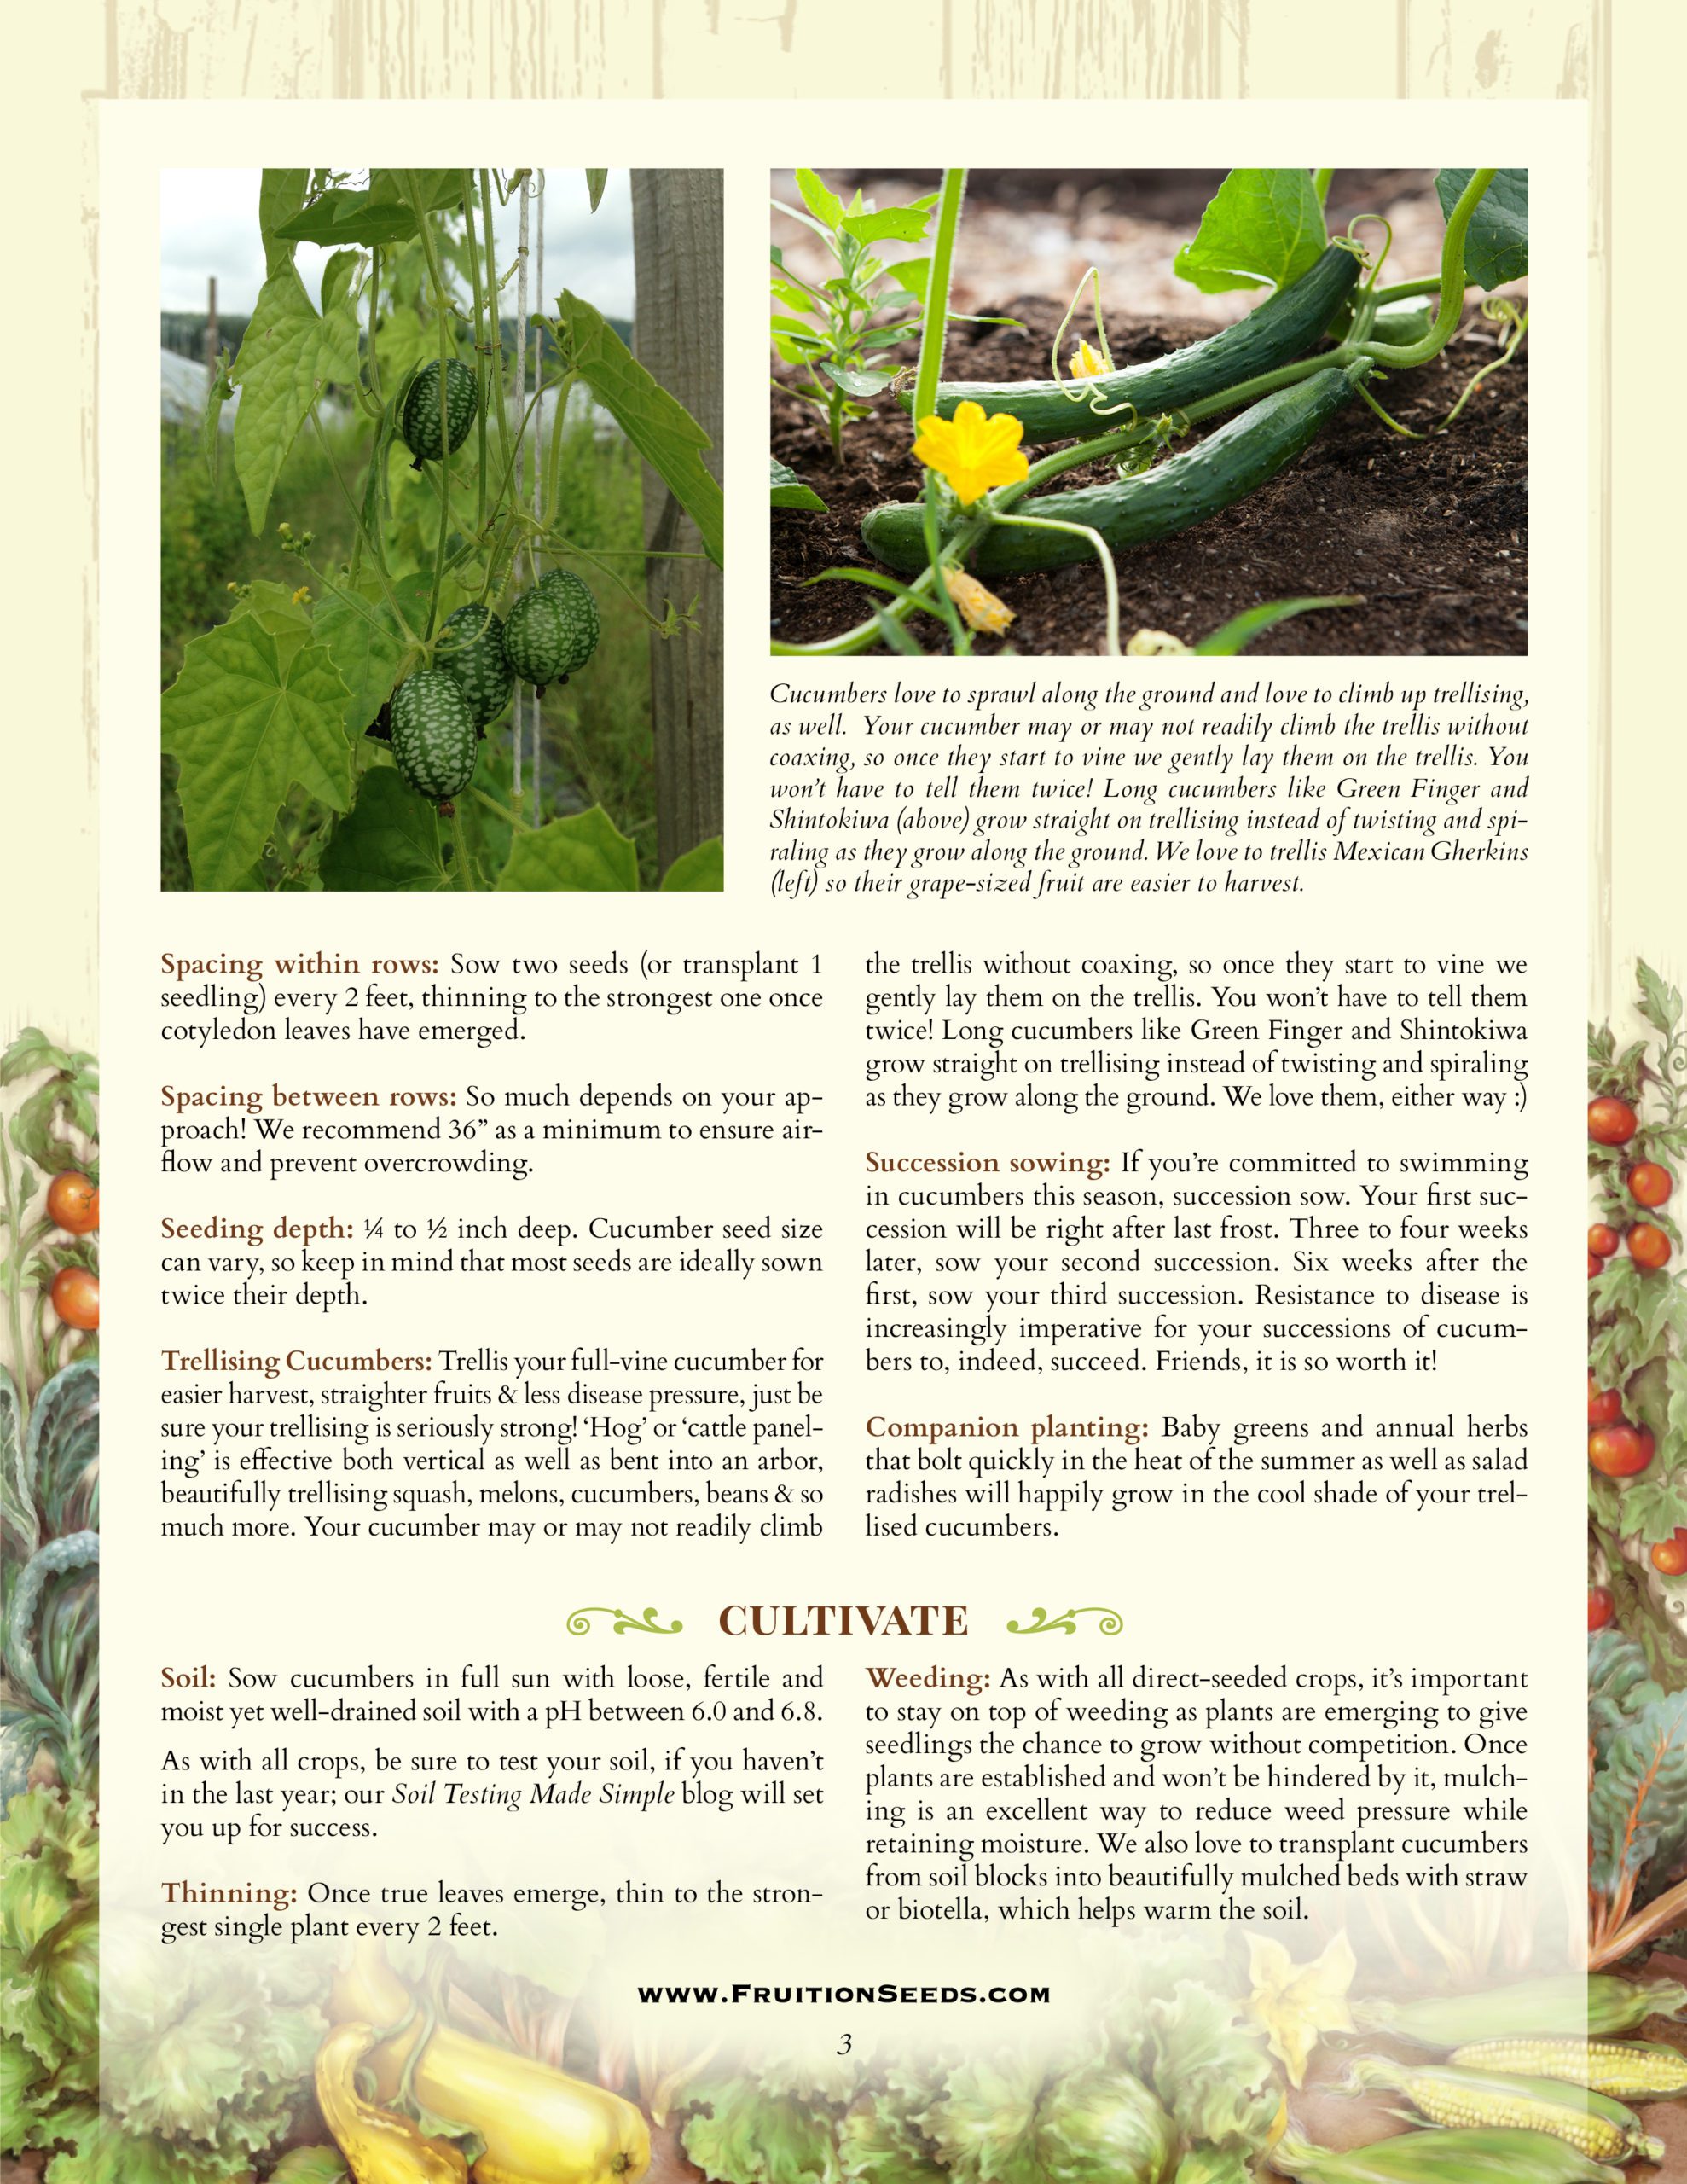 Thumbnail of Growing Guide for Sowing & Growing Series: Cucumber